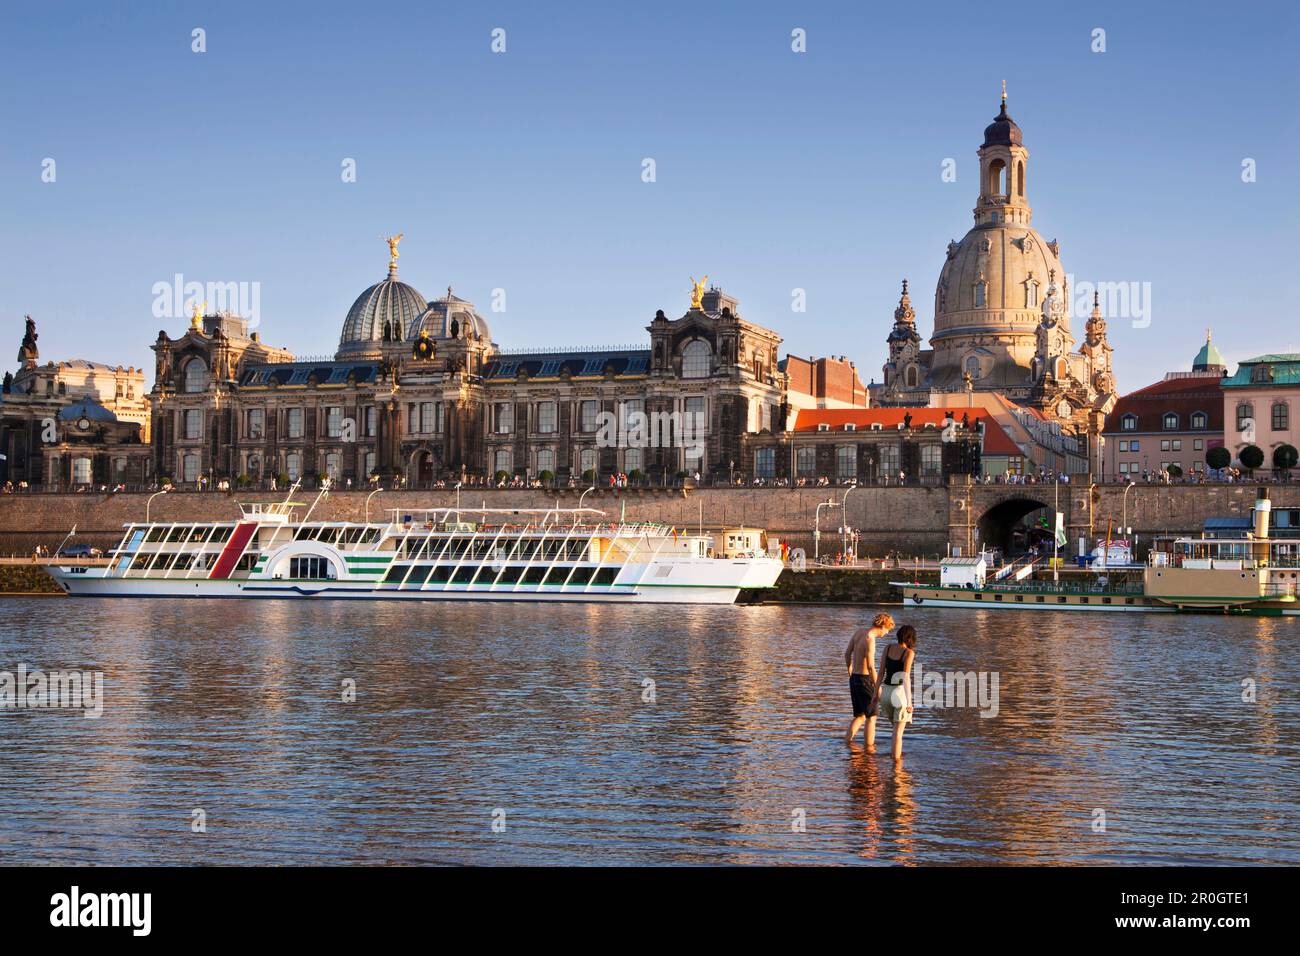 Young couple at the Elbe river, Bruehlsche Terrasse and Frauenkirche in the background, Dresden, Saxonia, Germany, Europe Stock Photo